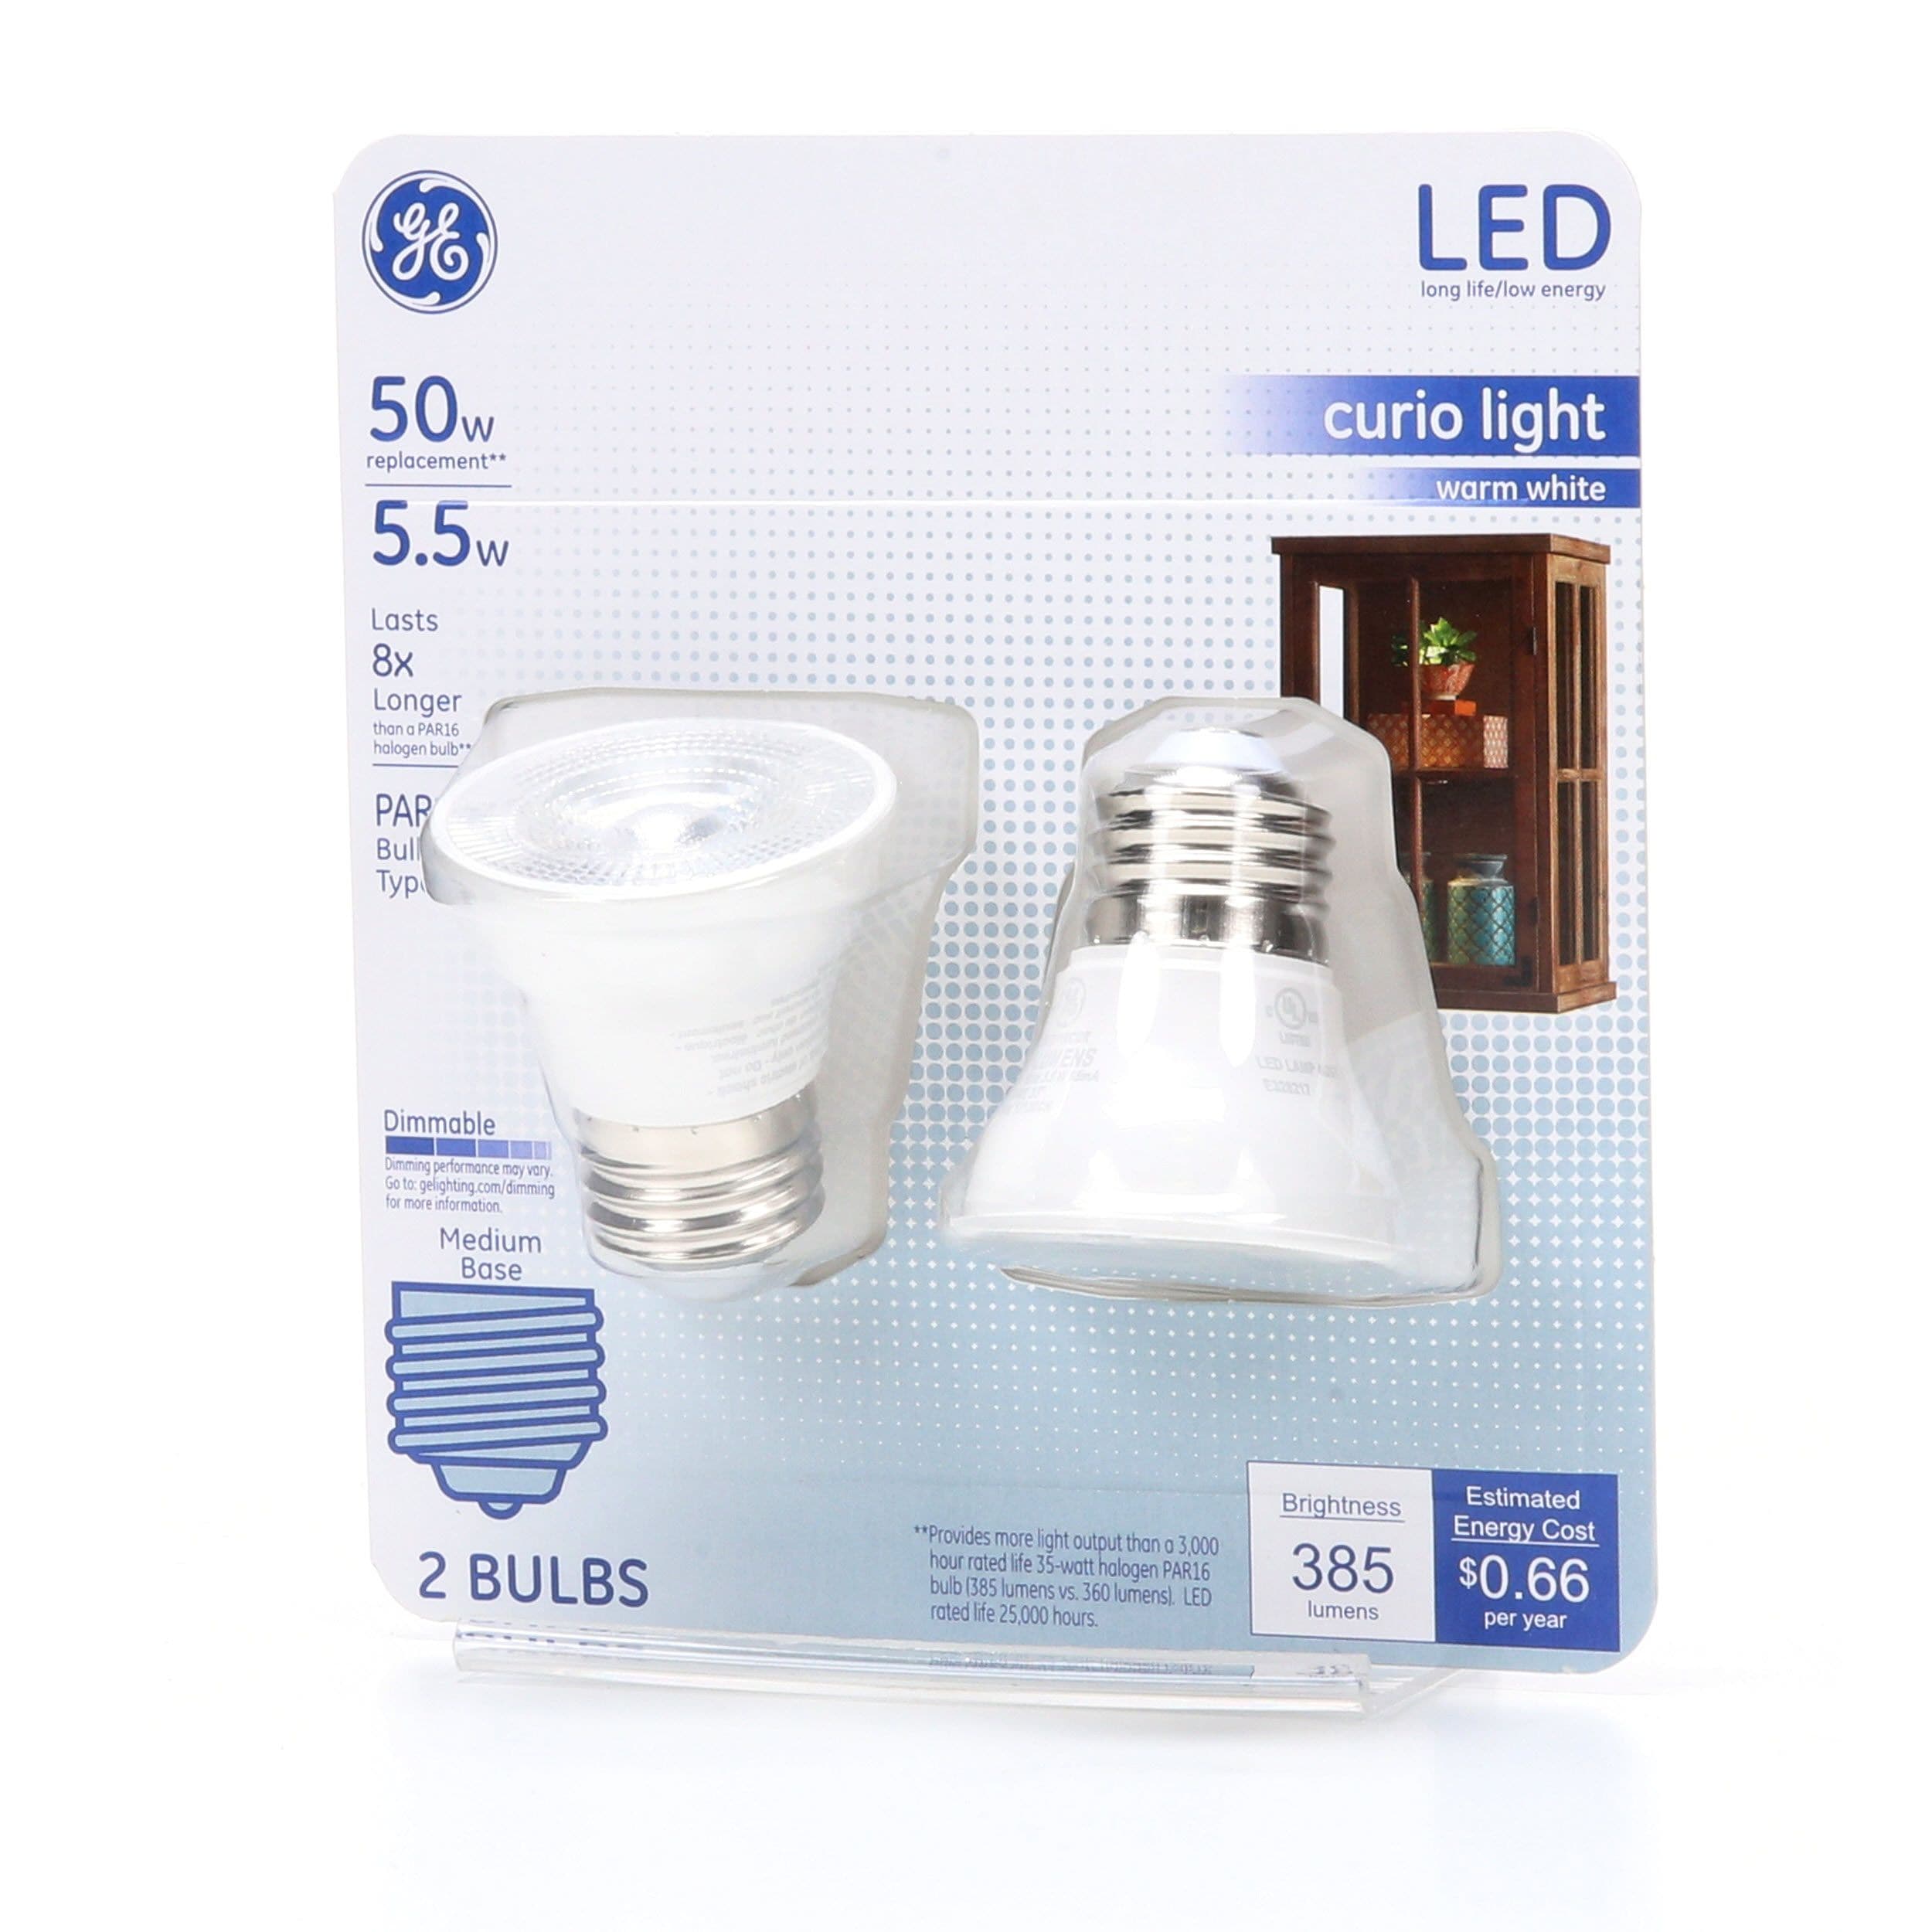 Curio cabinets Specialty Light Bulbs at Lowes.com